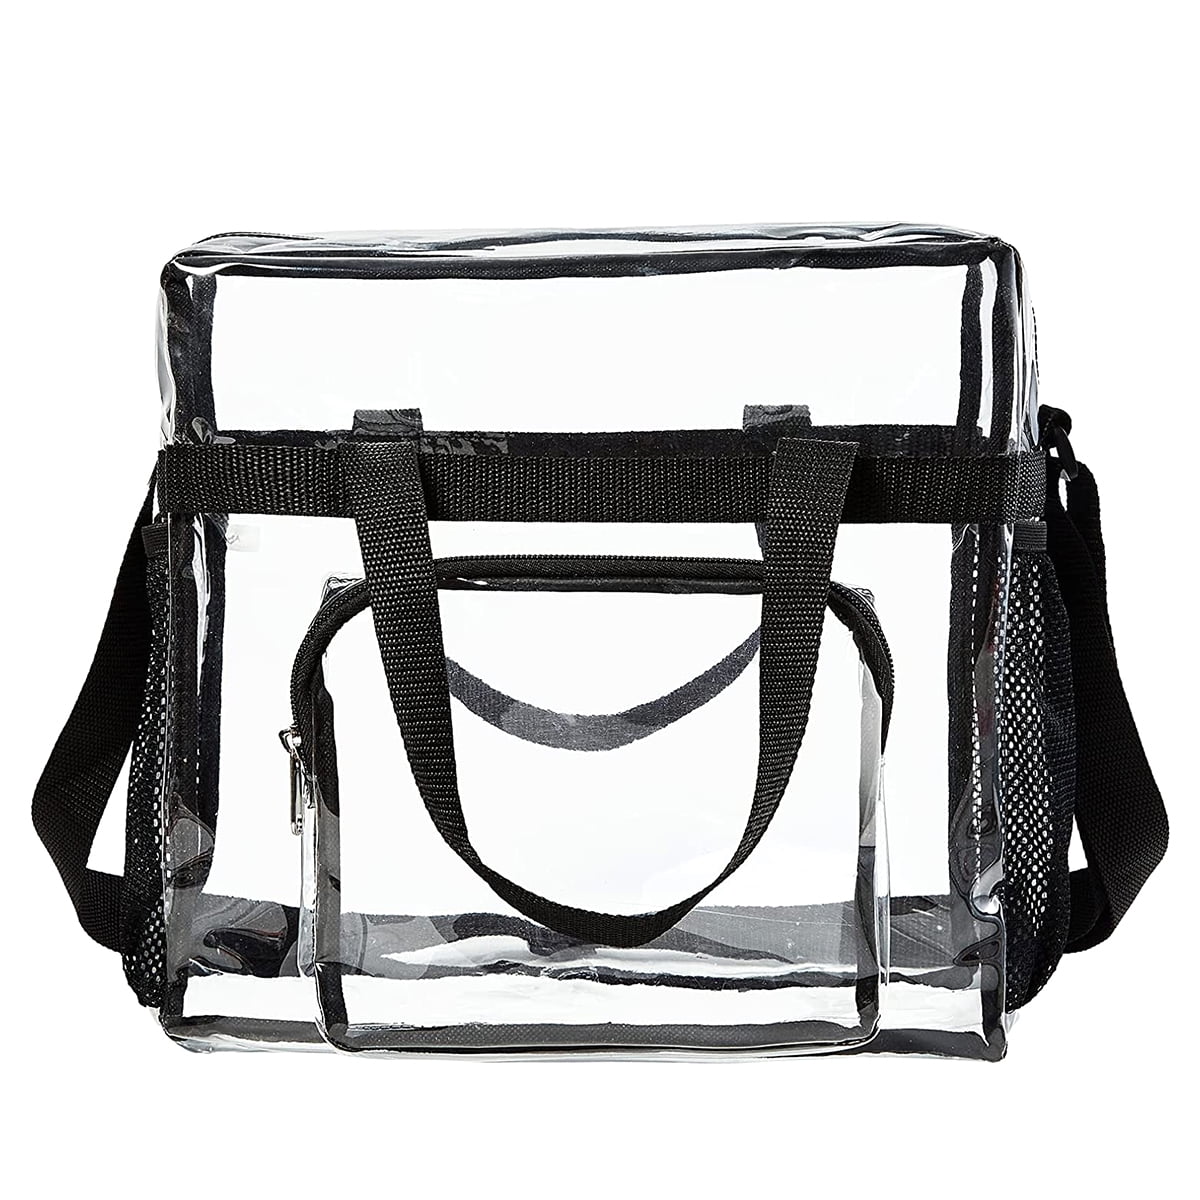 Wovilon Clear Bag with Adjustable Strap Clear Tote Bag with Zipper Clear Bags Stadium Approved Travel & Gym for Work, Size: 7.5 x 3.9 x 3.9, Black